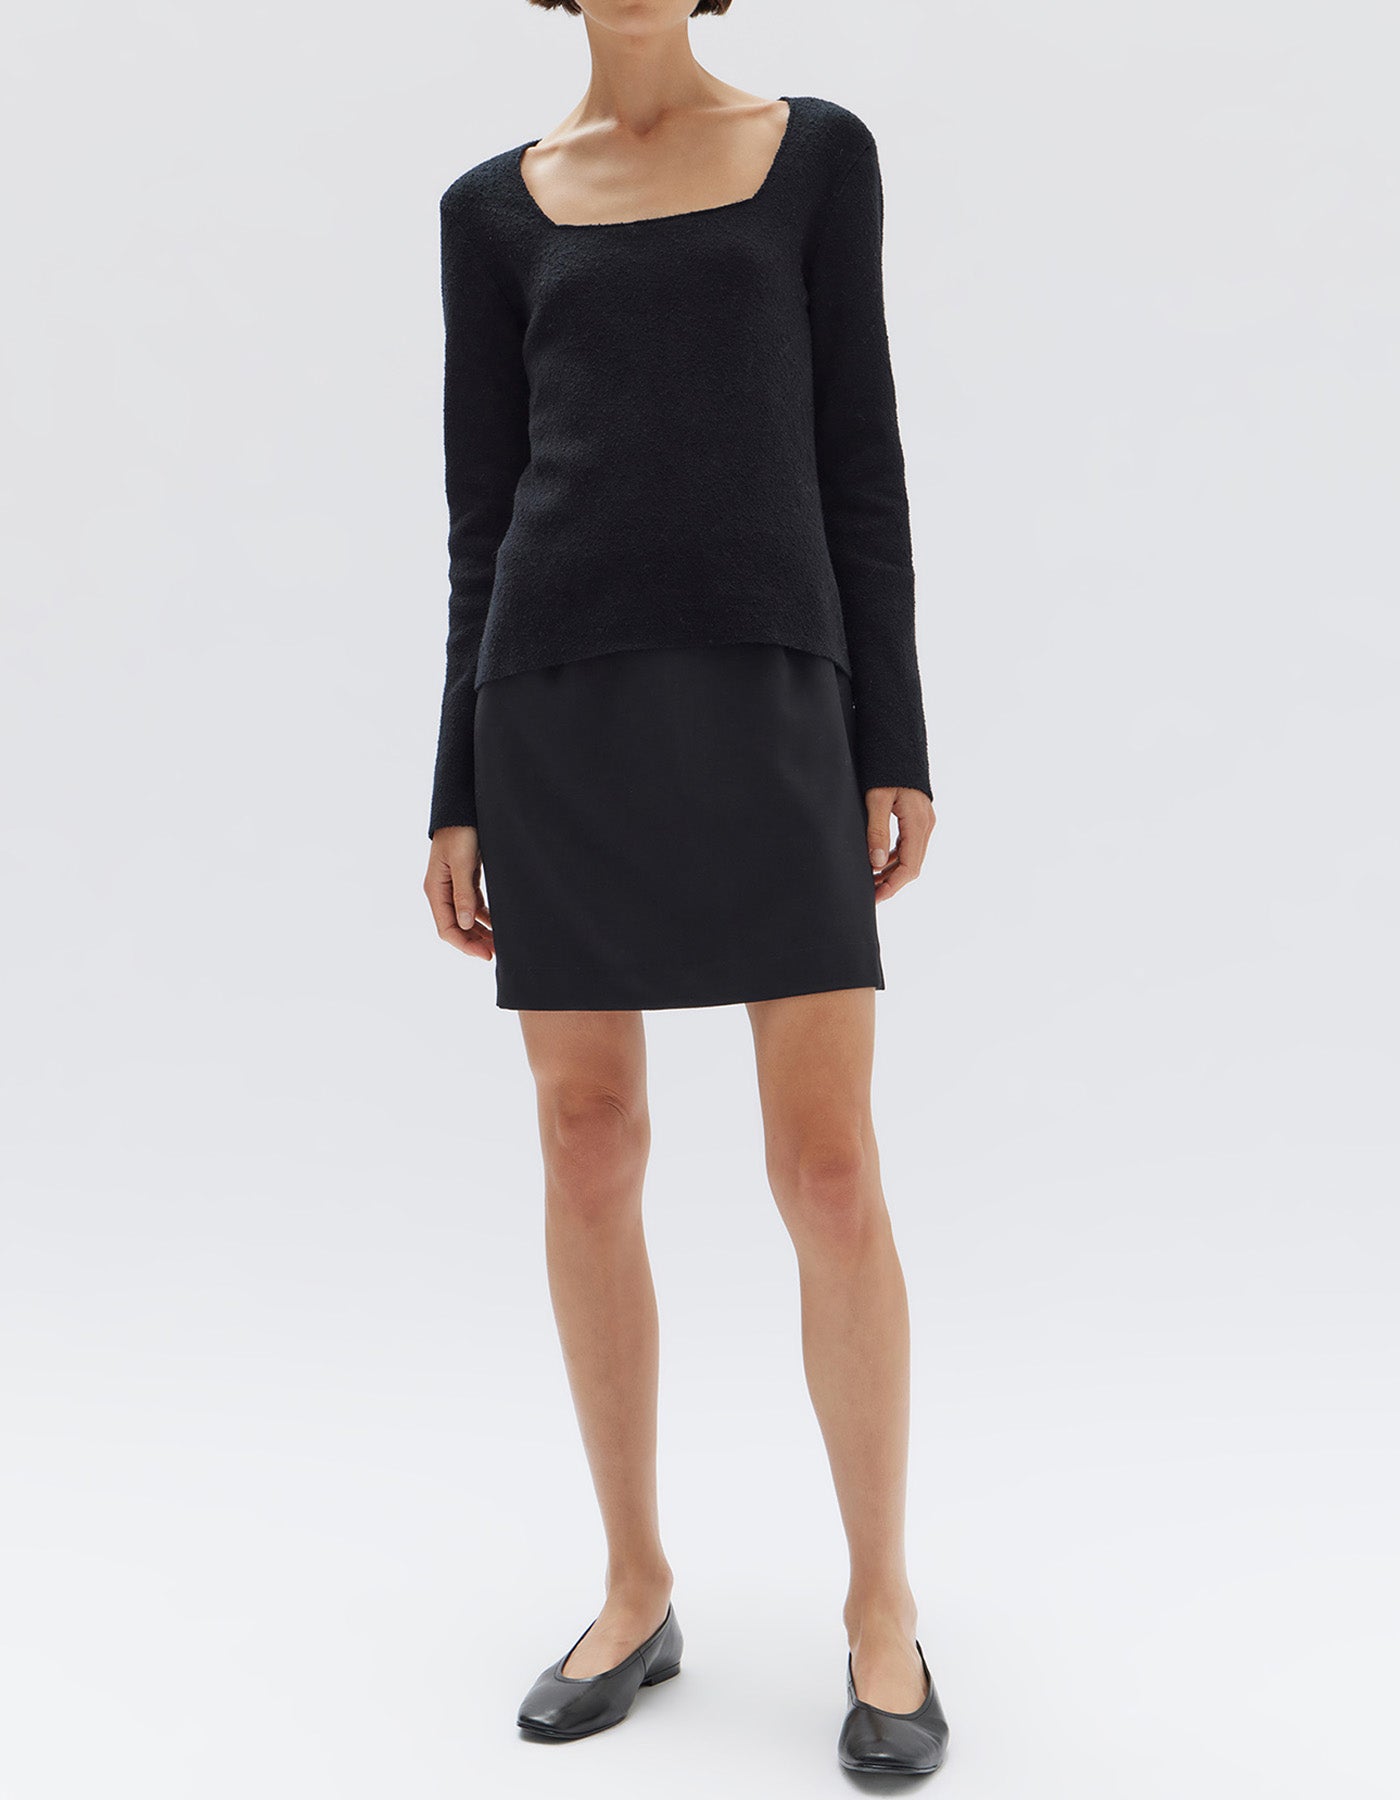 Assembly Label Meredith Square Neck Long Sleeve Top Black